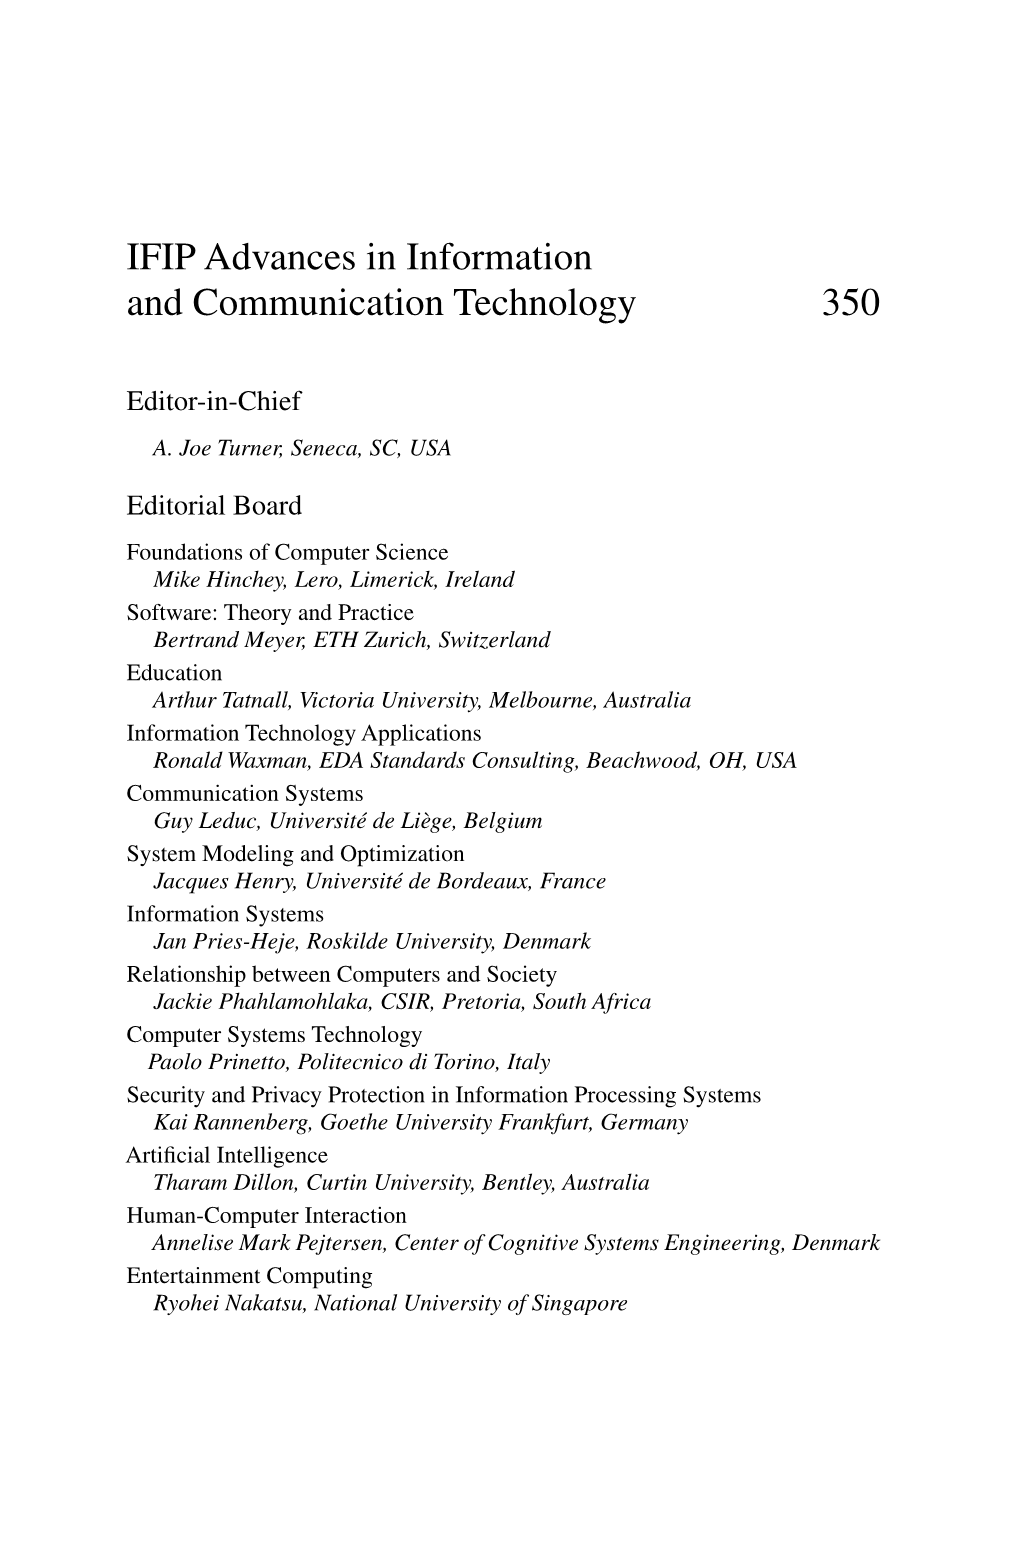 IFIP Advances in Information and Communication Technology 350